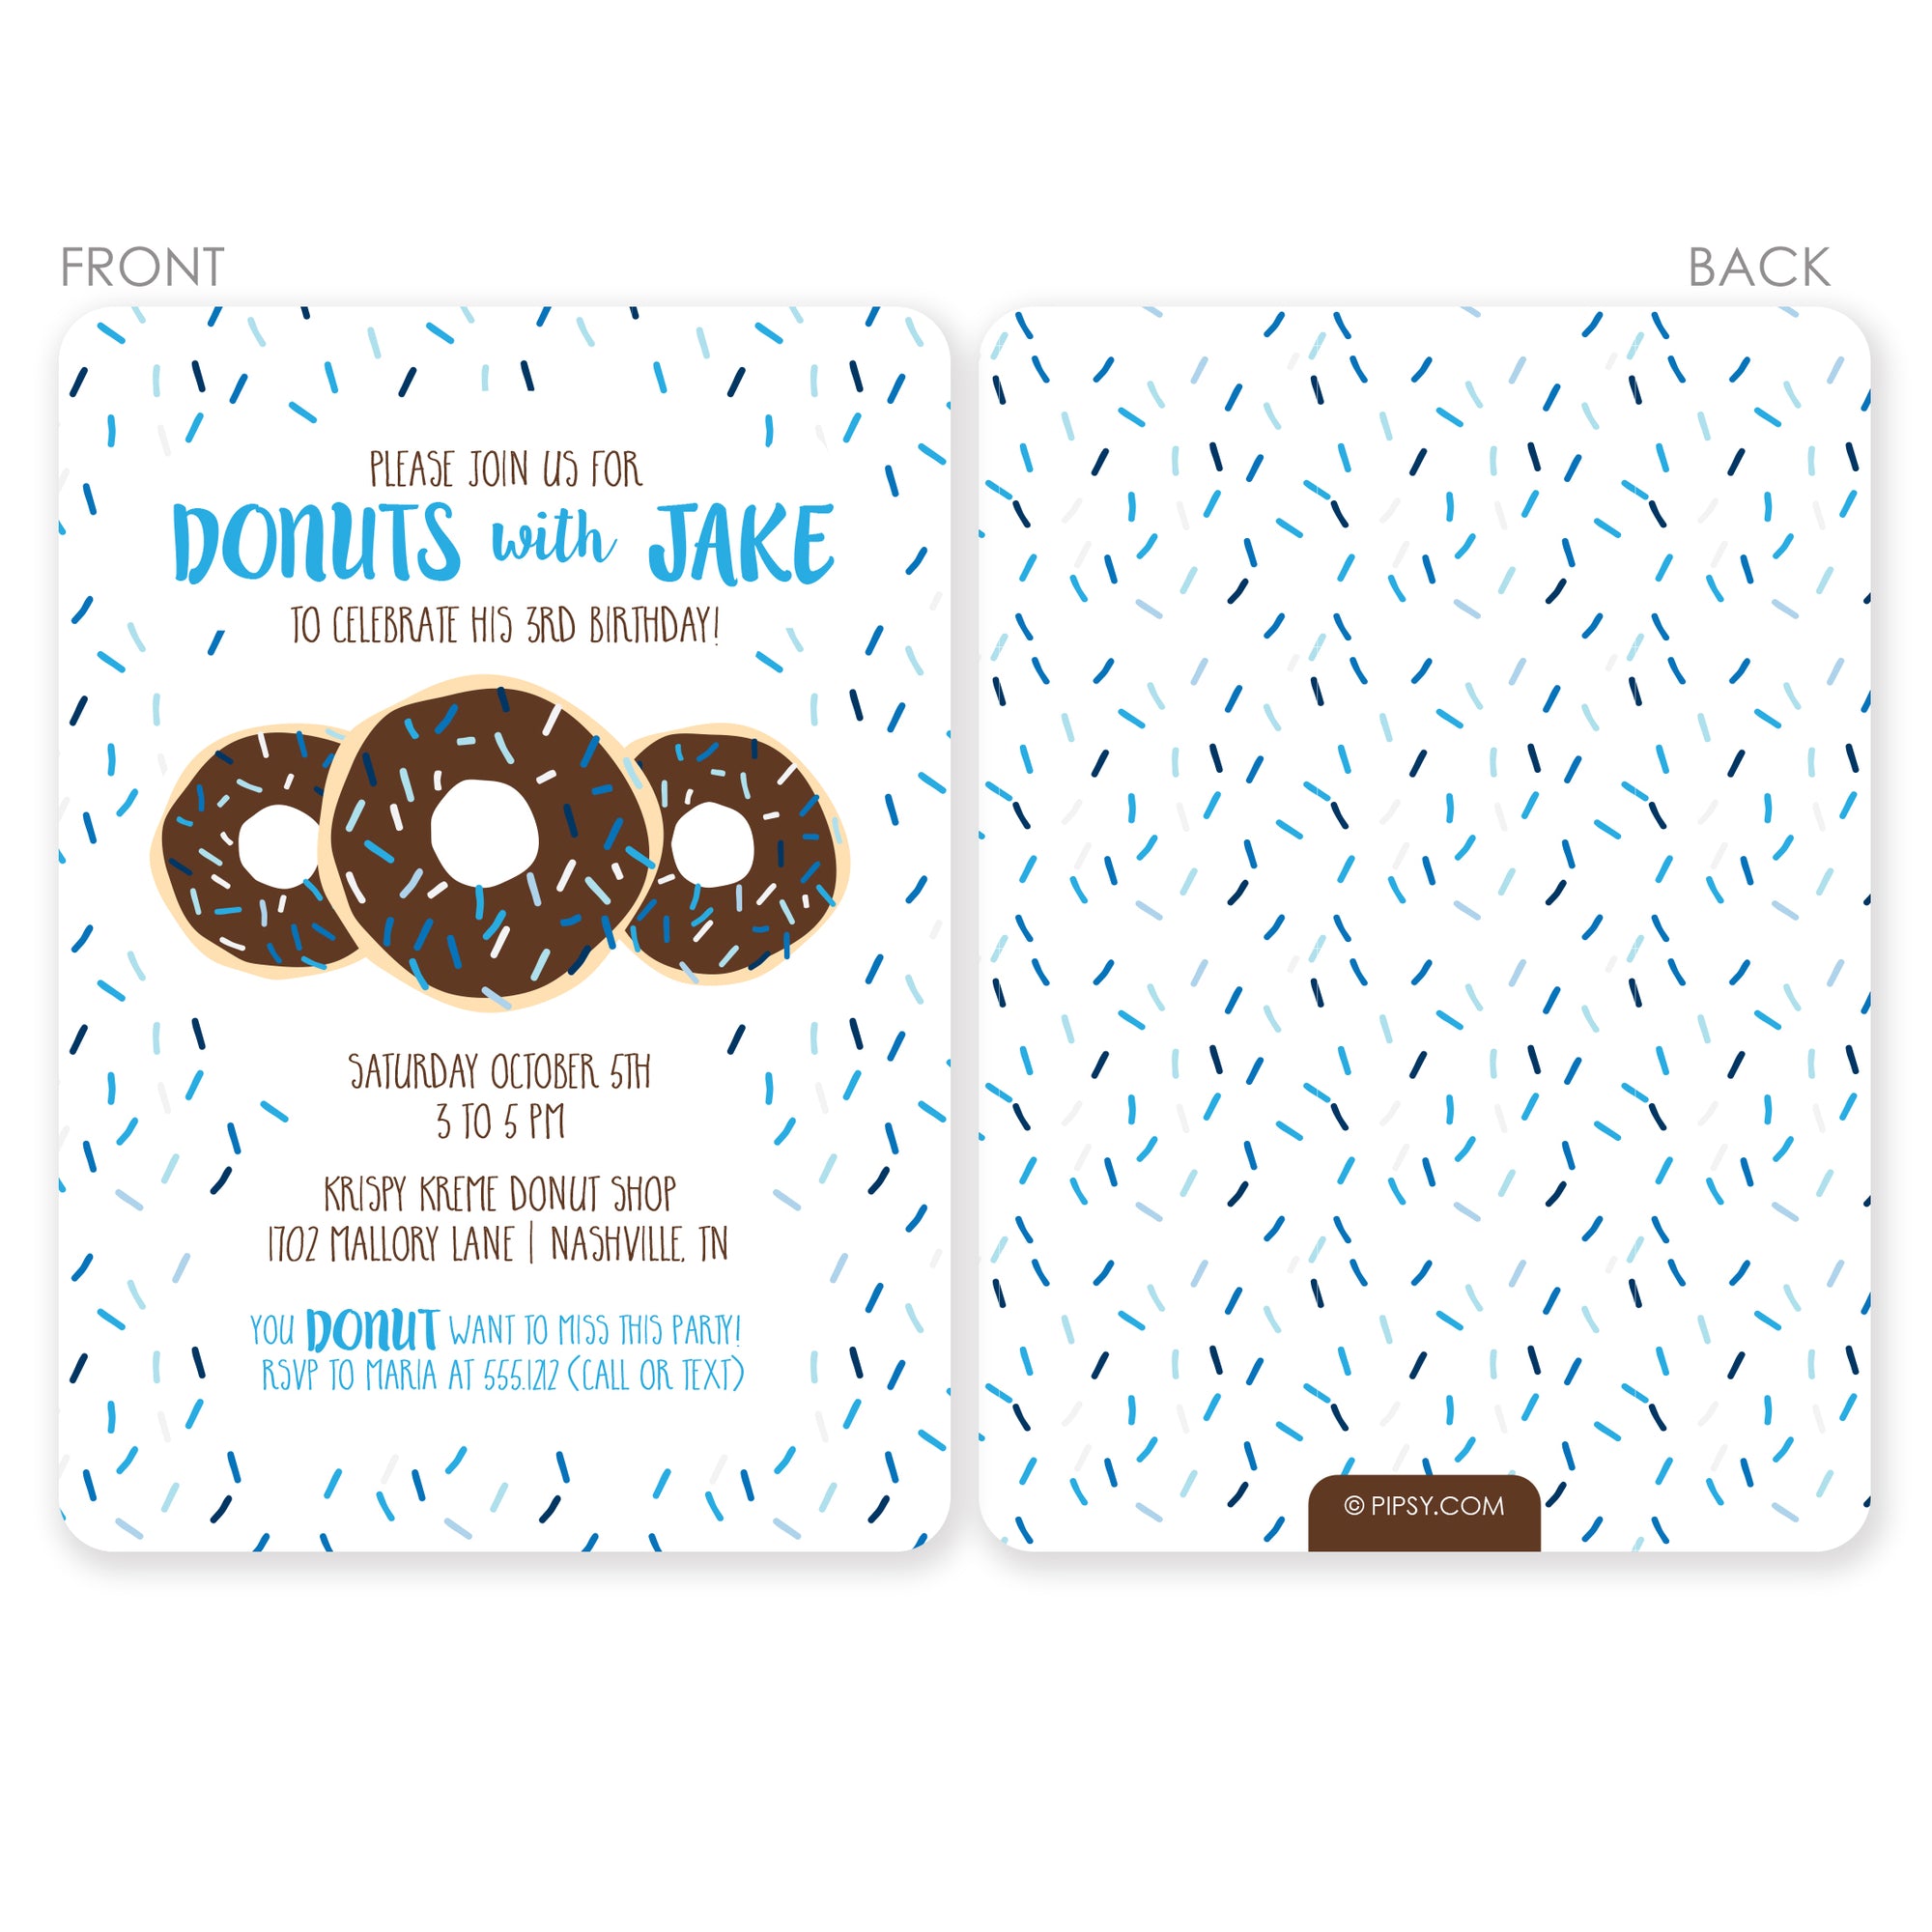 Donut Birthday Party invitation with chocolate donuts and blue sprinkles, printed on thick cardstock with 2 sided printing, includes envelopes